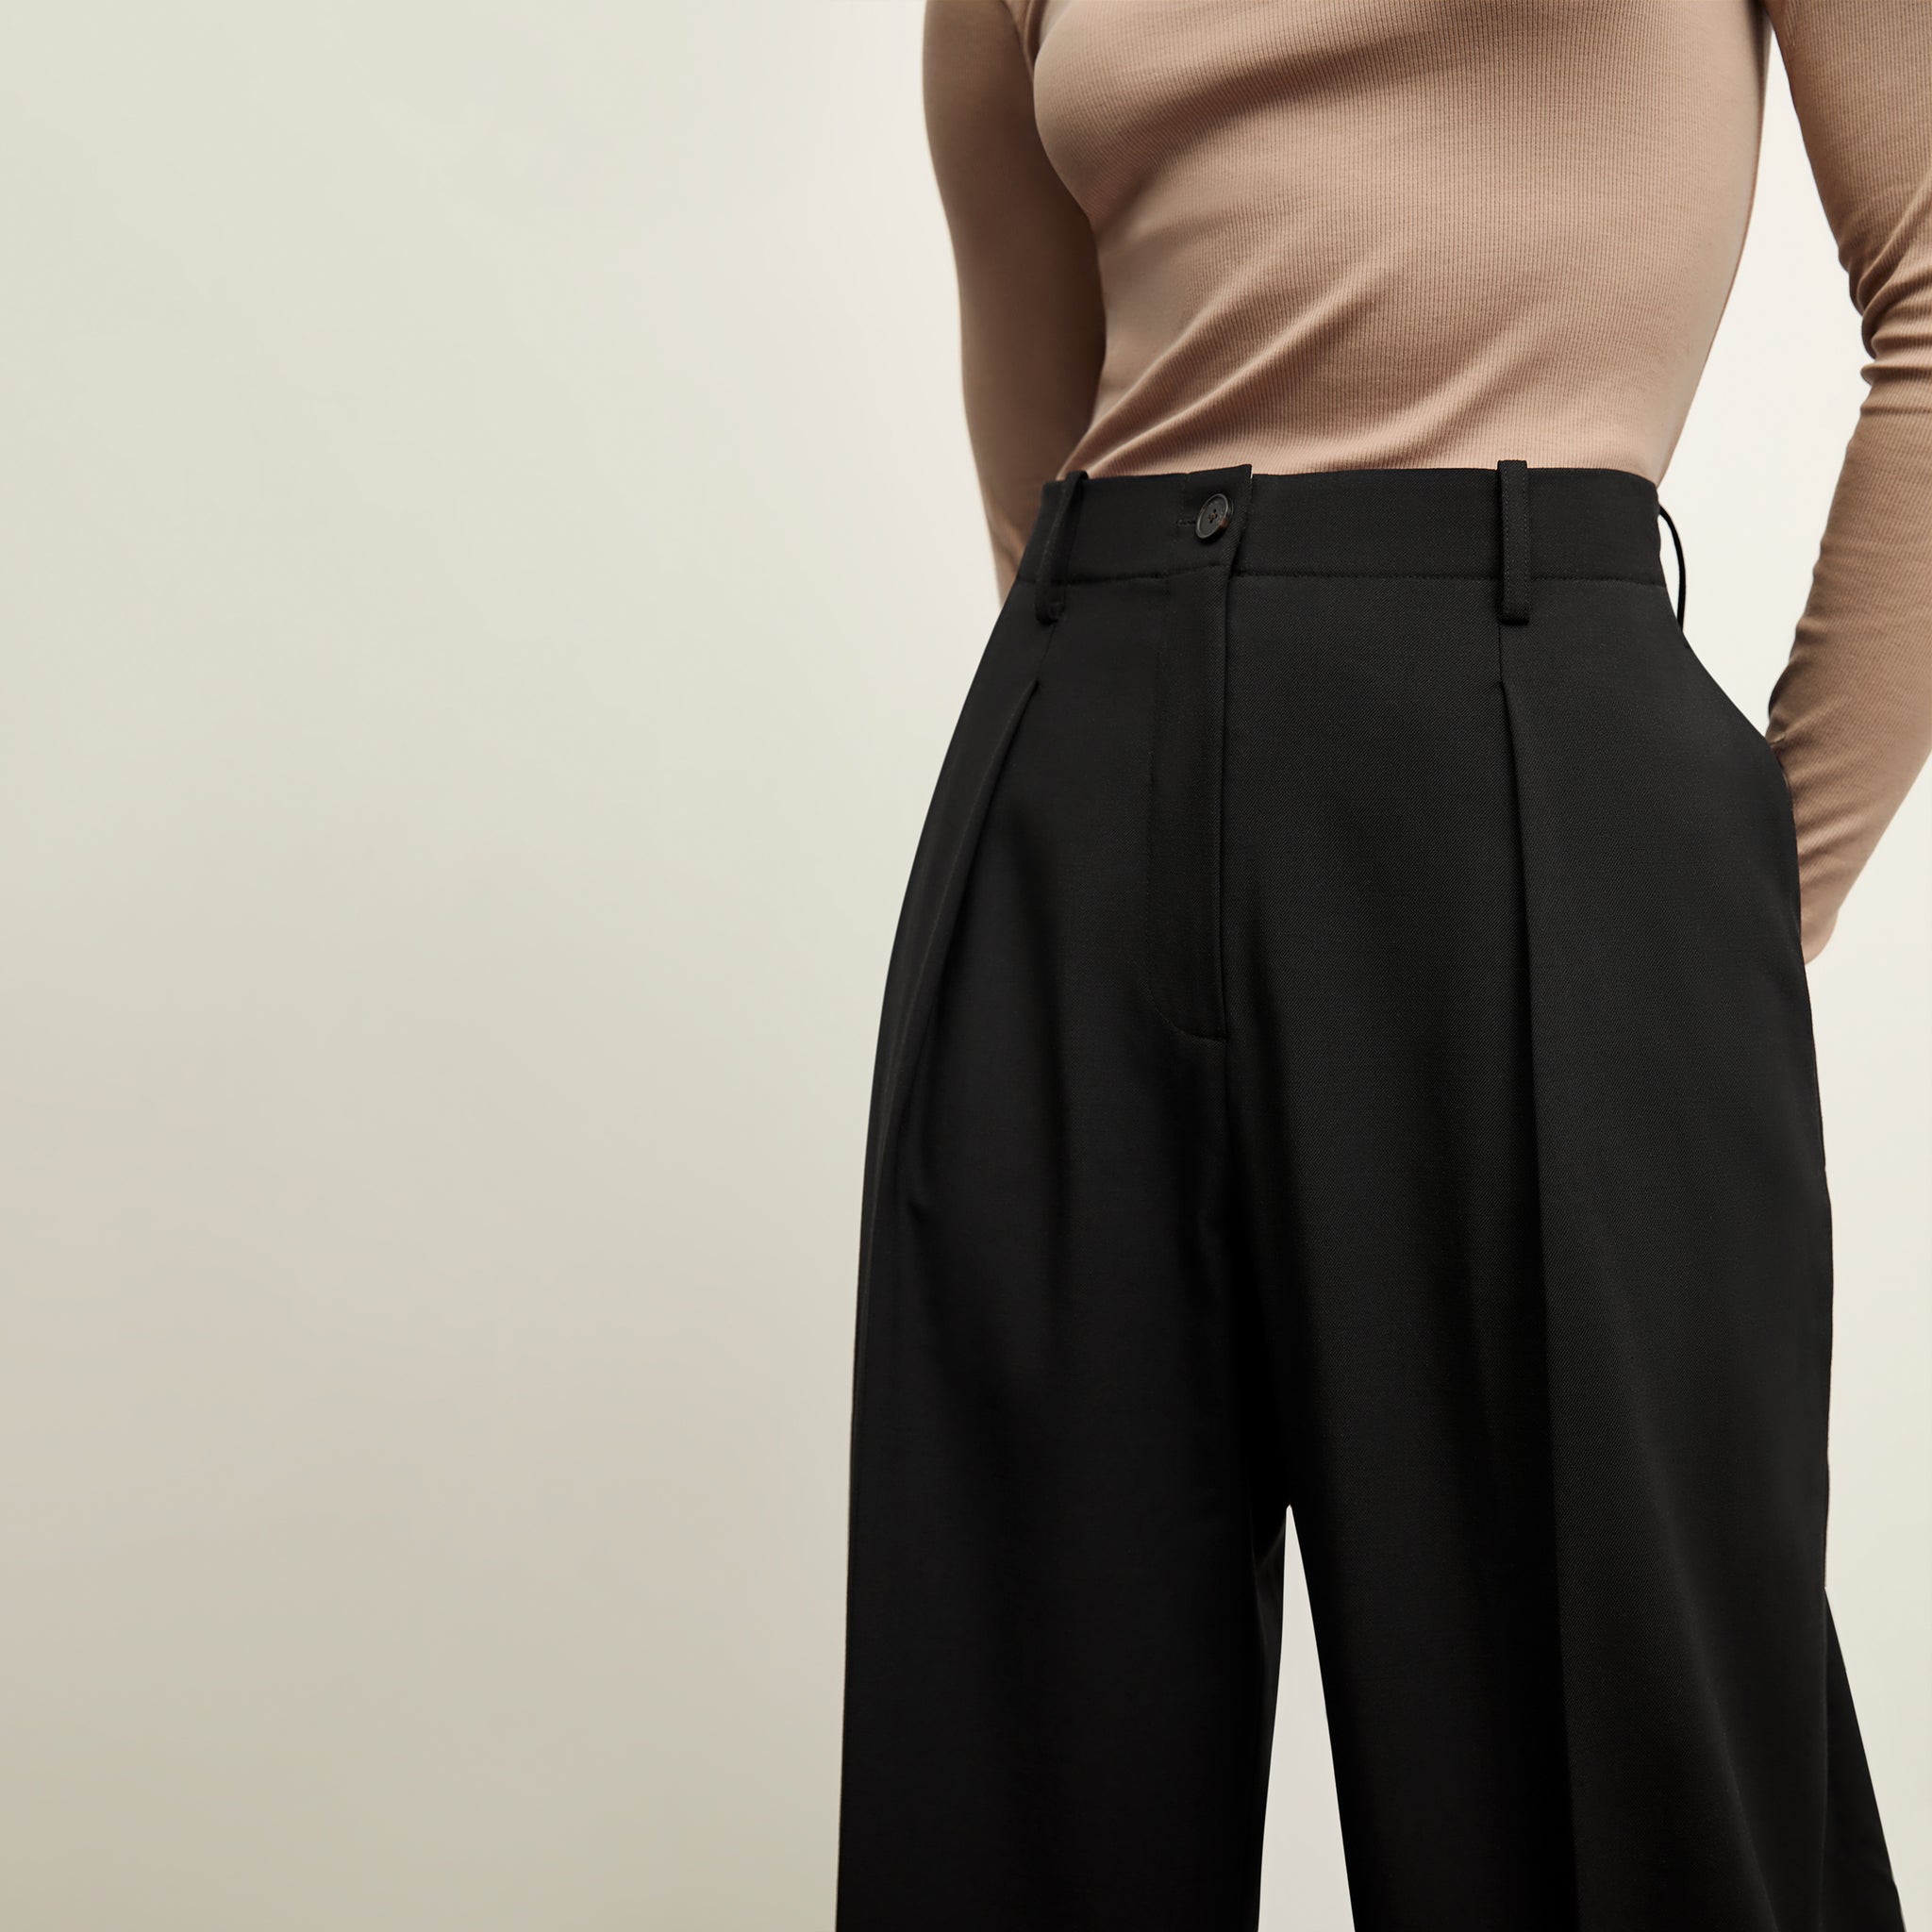 detail image of a woman wearing the zuri pant in black